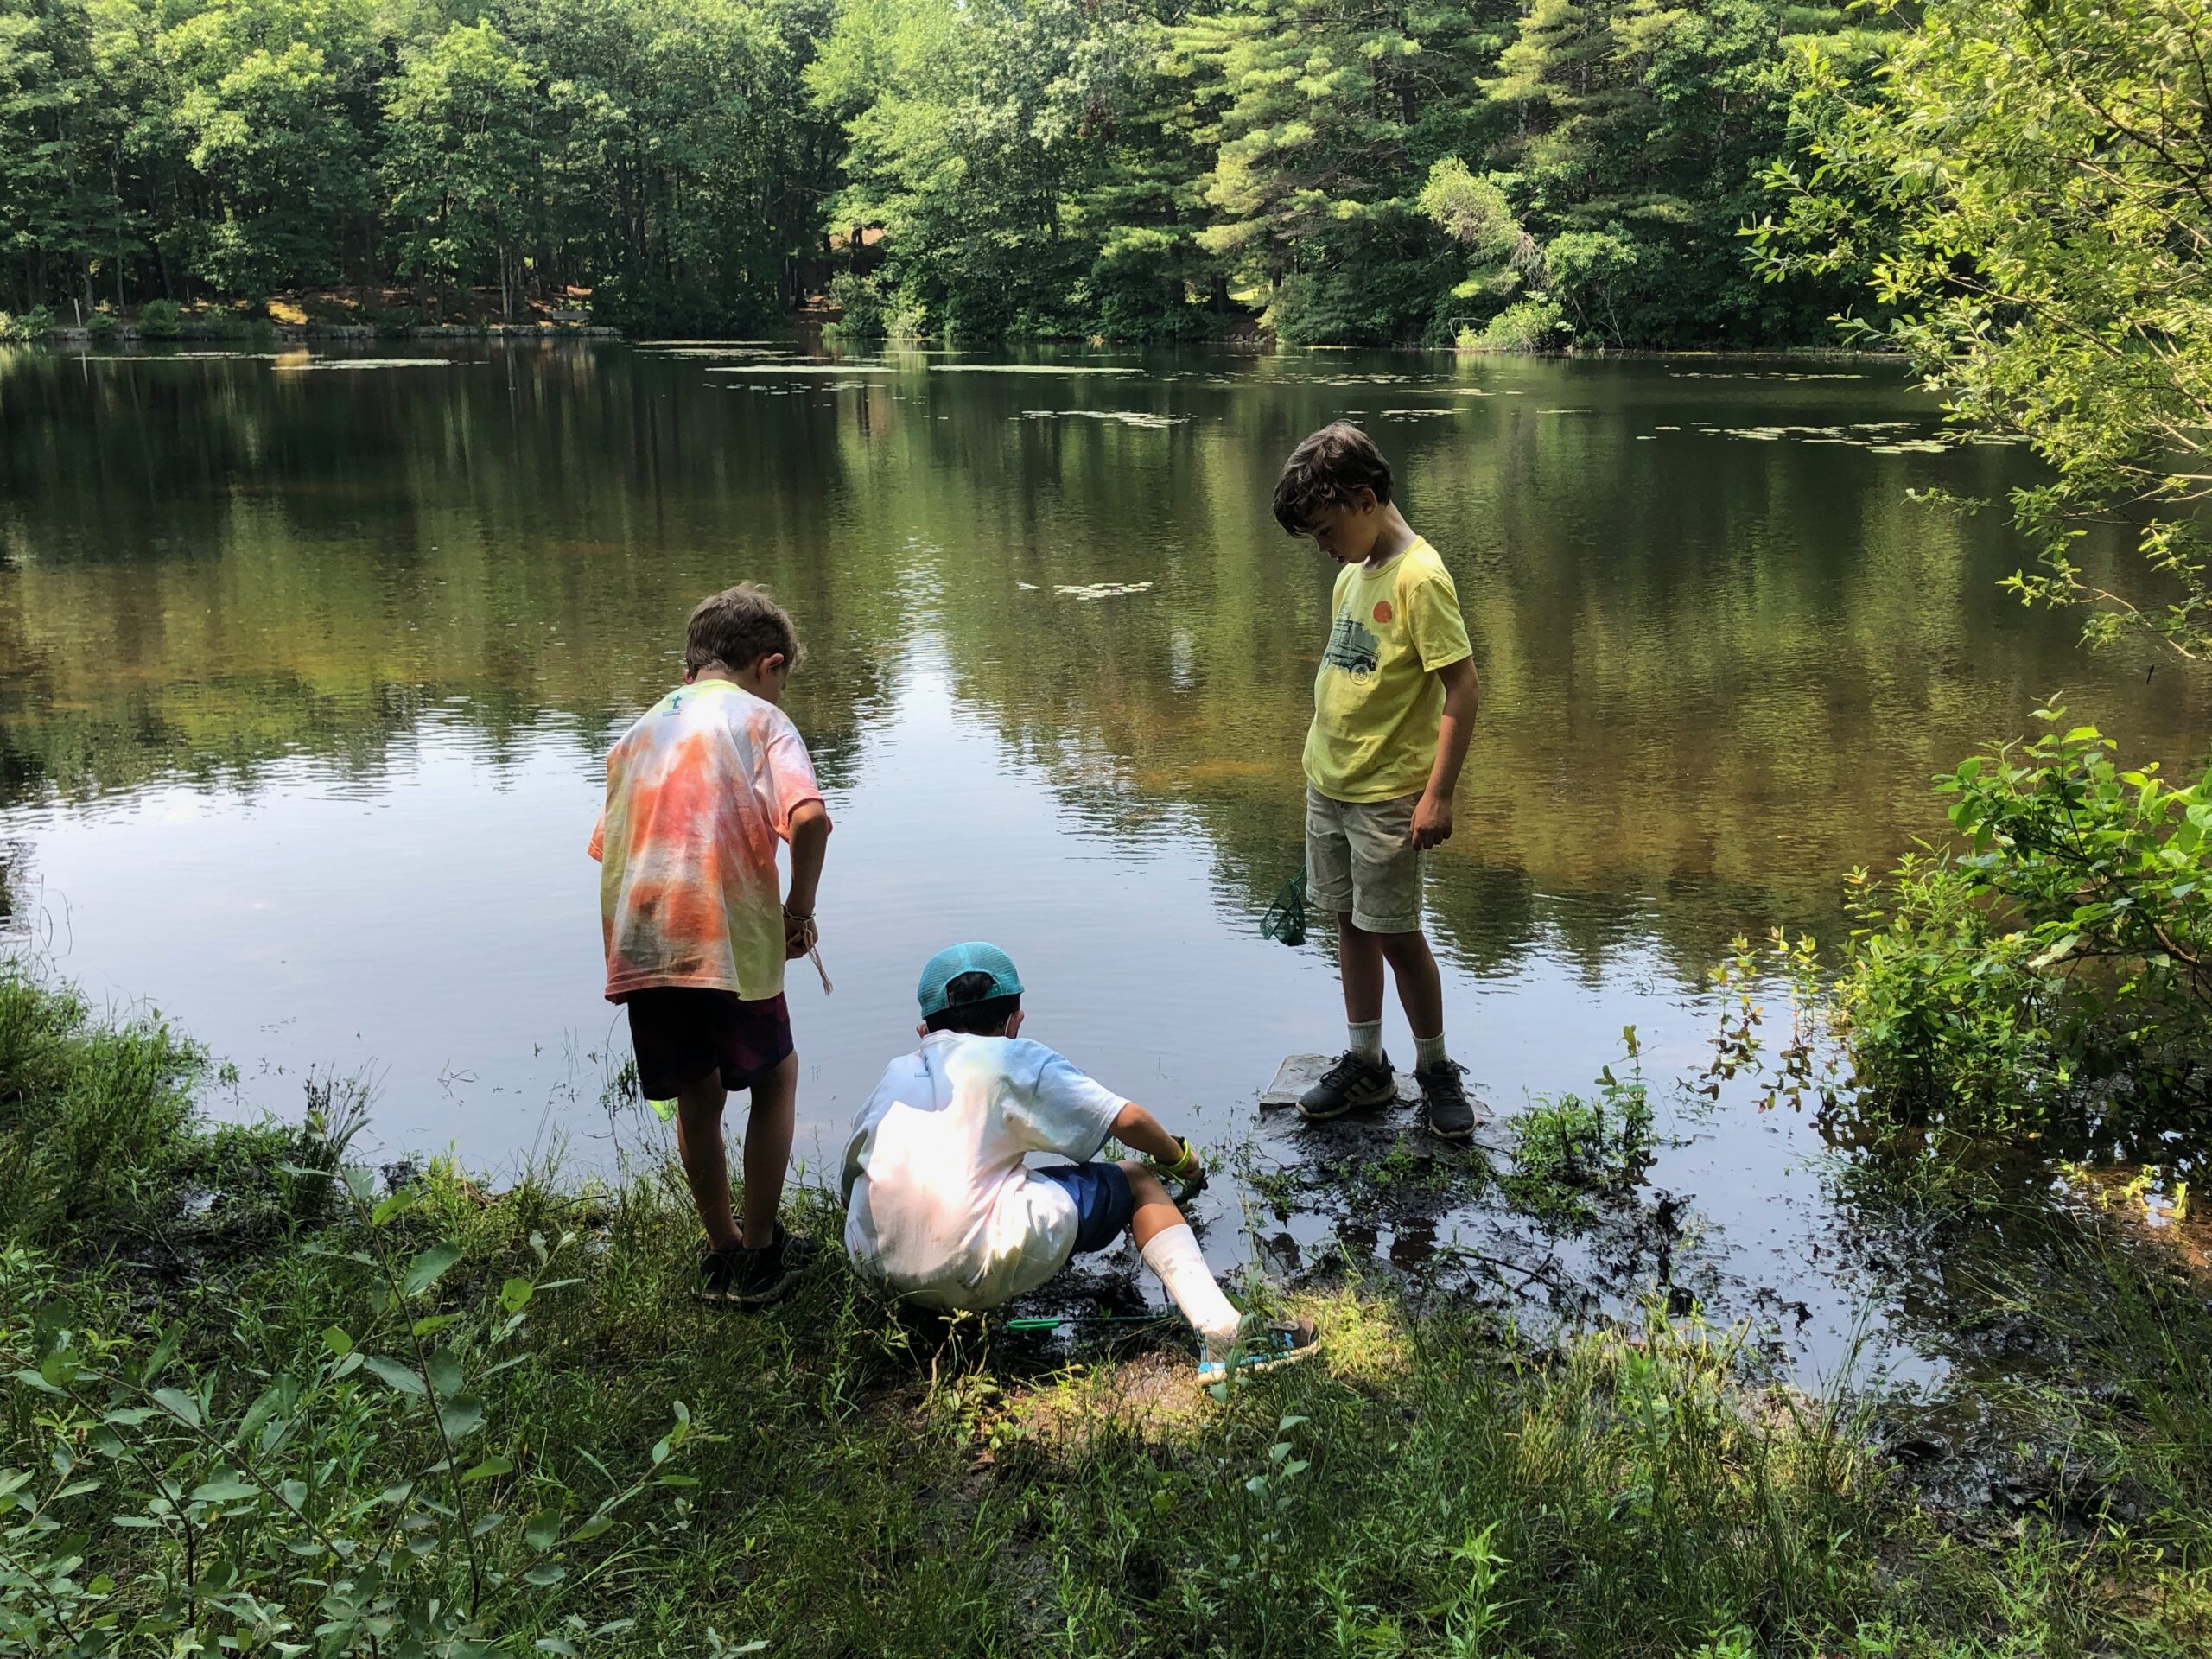 Three campers standing next to a woodland pond outdoors during the day